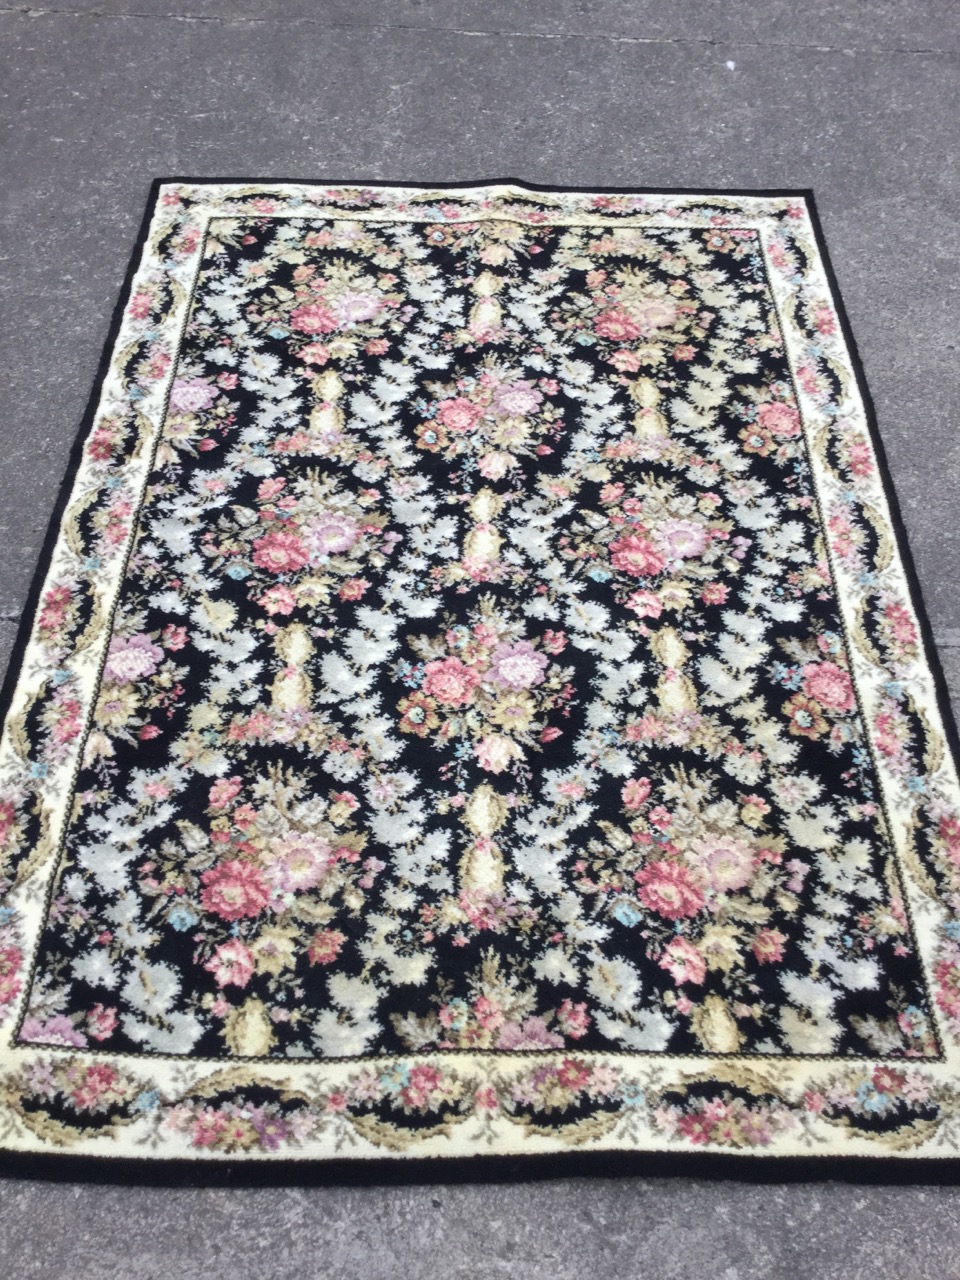 A Spanish Whitney wool rug woven in the Escorial pattern with field of flowers on black ground - Image 2 of 3